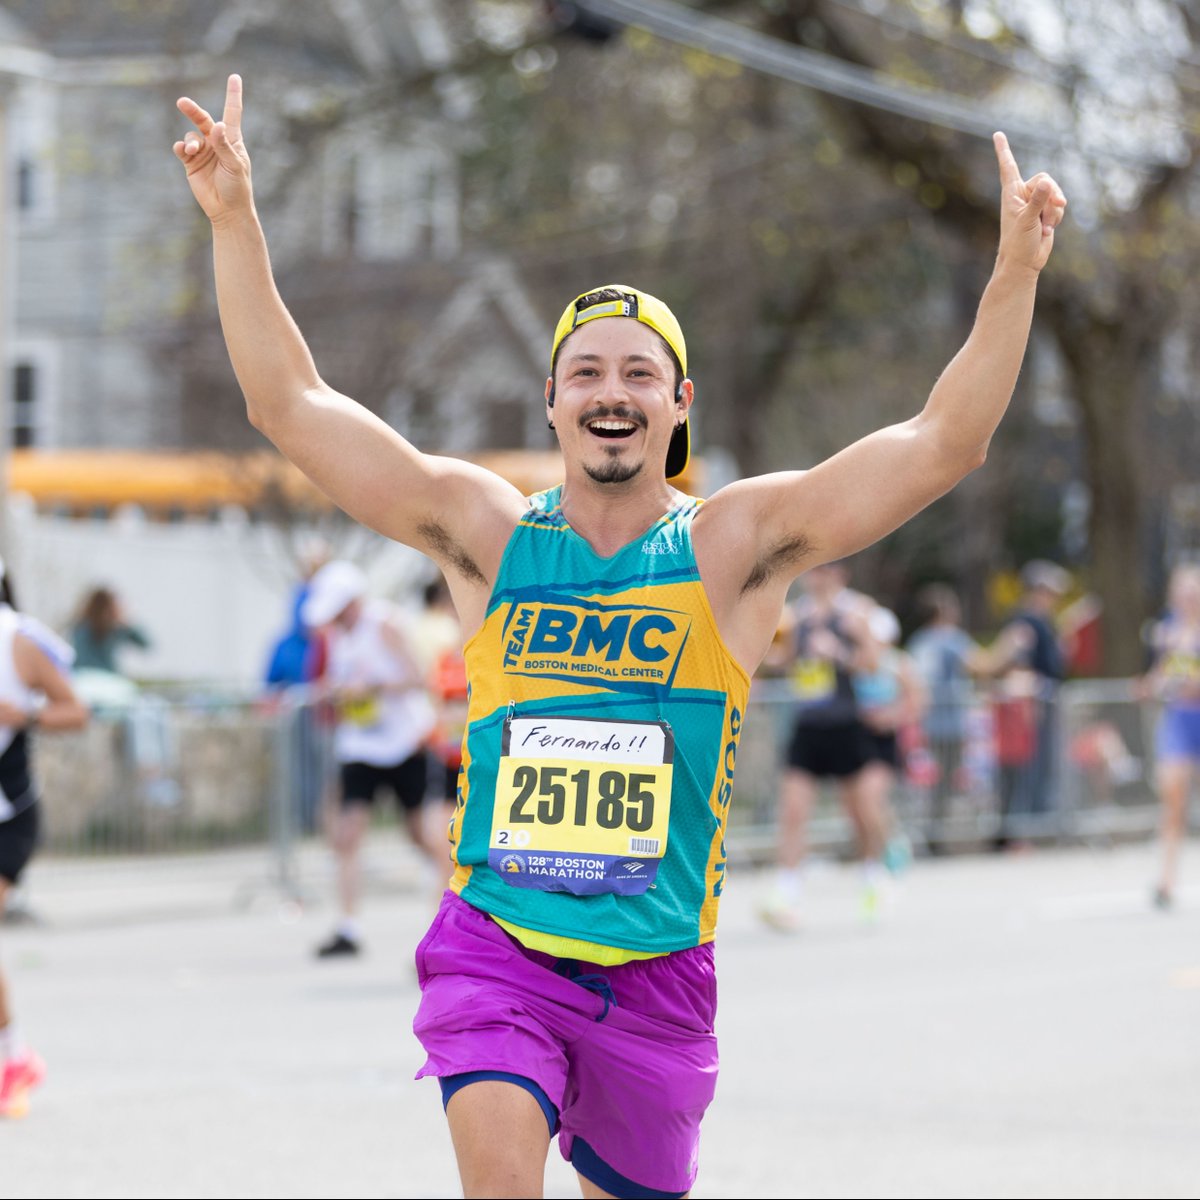 Thank you and congrats to our #TeamBMC athletes who participated in the @bostonmarathon yesterday! Special thanks to all the generous supporters who donated to their fundraising efforts. Interested in joining Team BMC next year? Sign up for our email list: bit.ly/4d0VHOQ